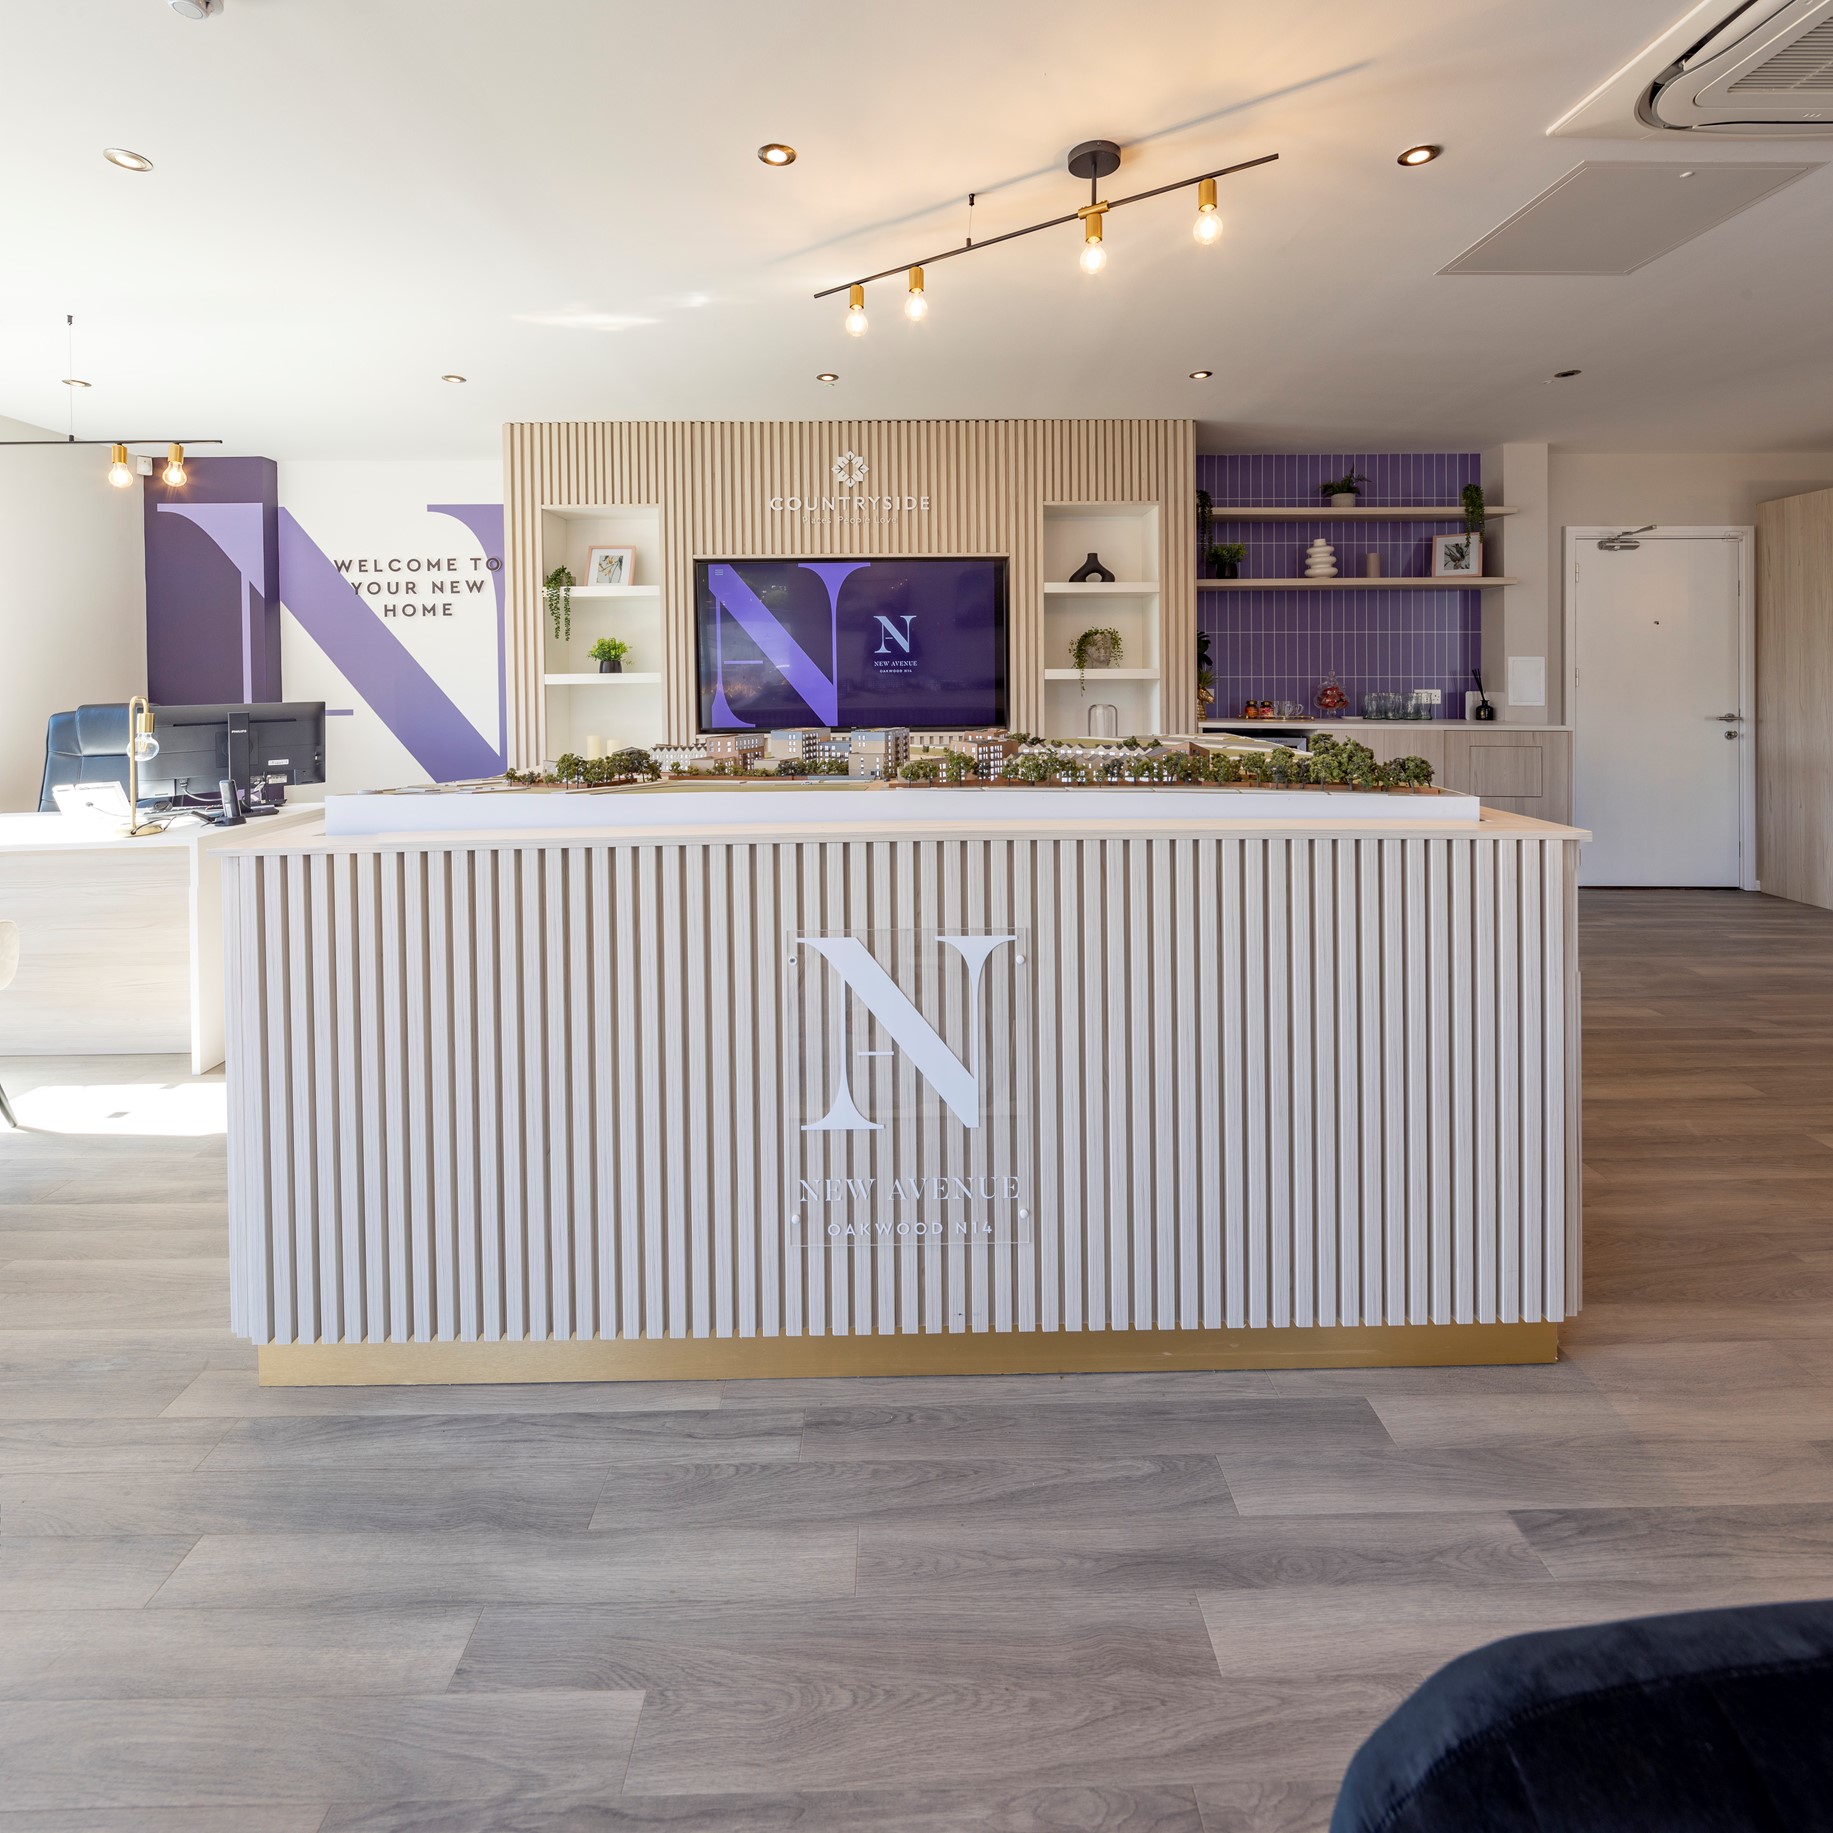 Bright marketing that uses lots of wooden furniture and the colour purple